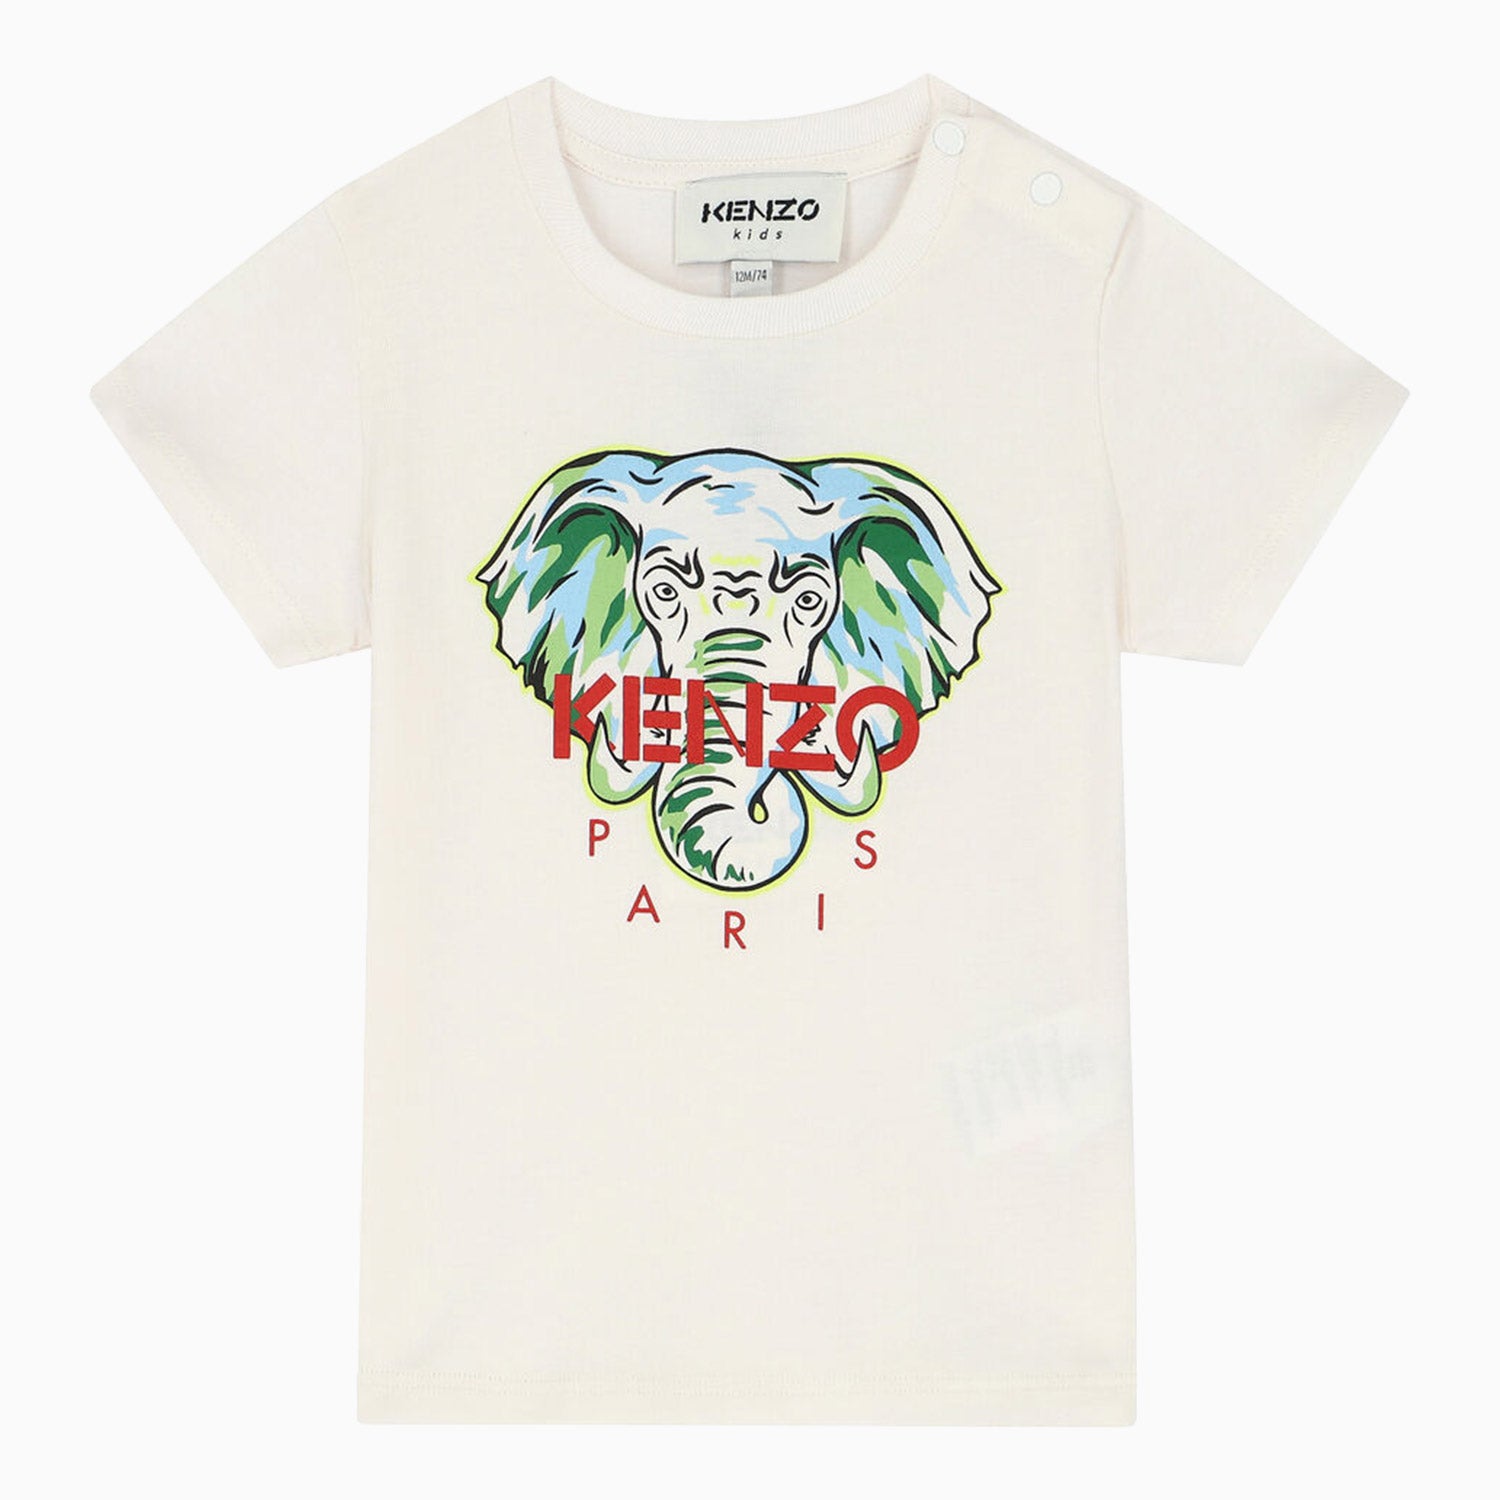 kenzo-kids-tropical-print-outfit-toddlers-k08039-152